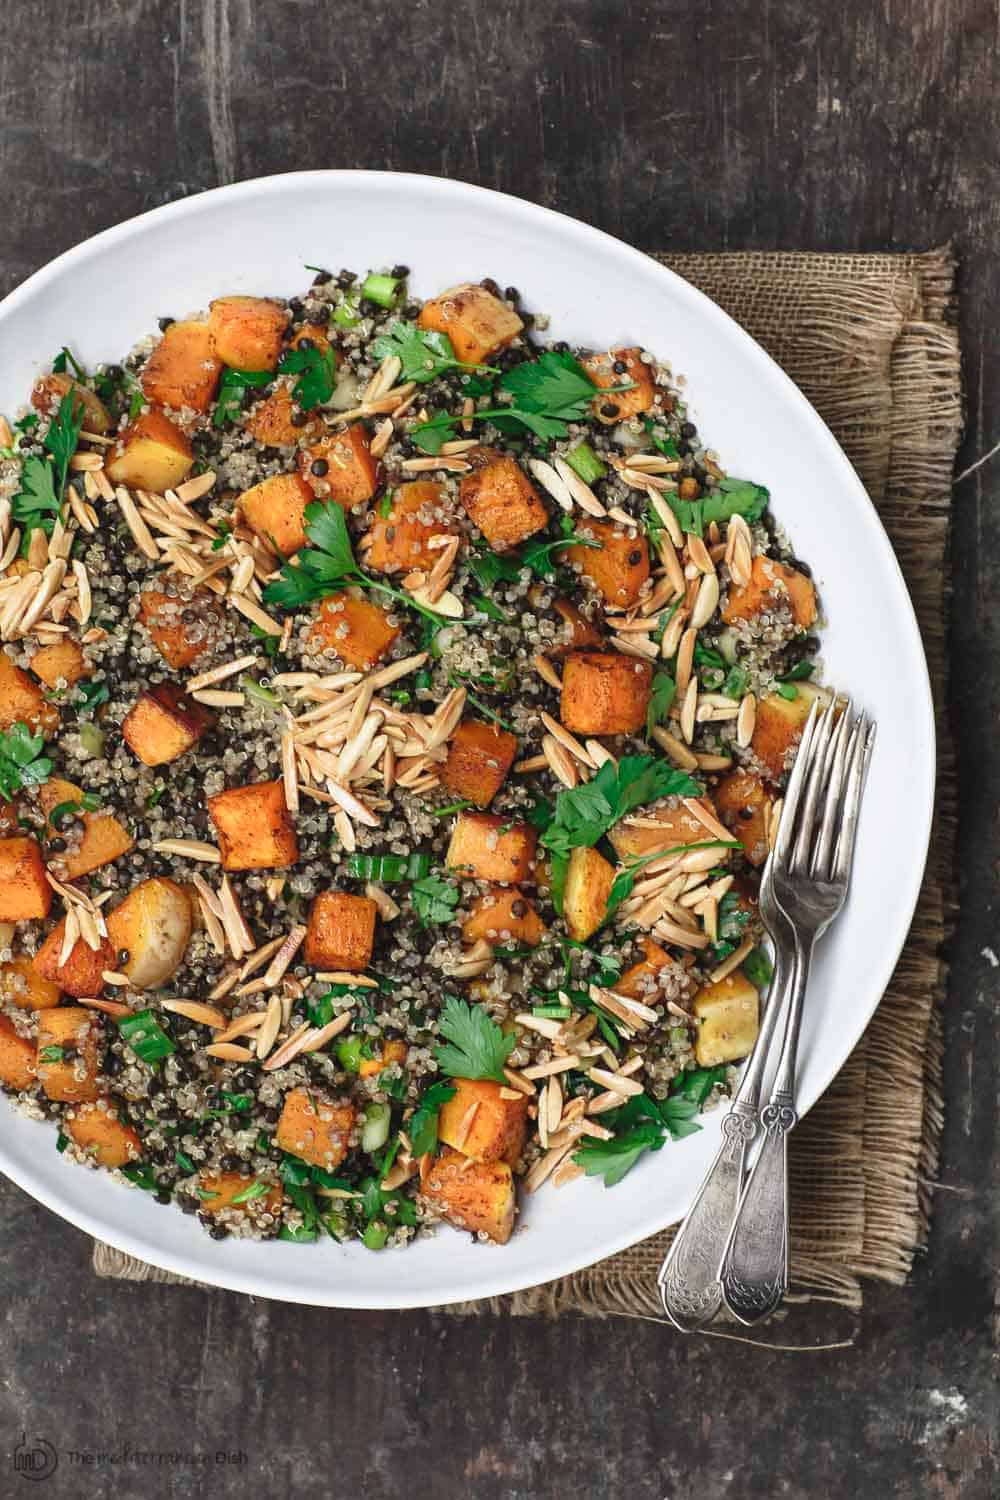 Easy Butternut Squash Recipe with Lentils and Quinoa | The ...